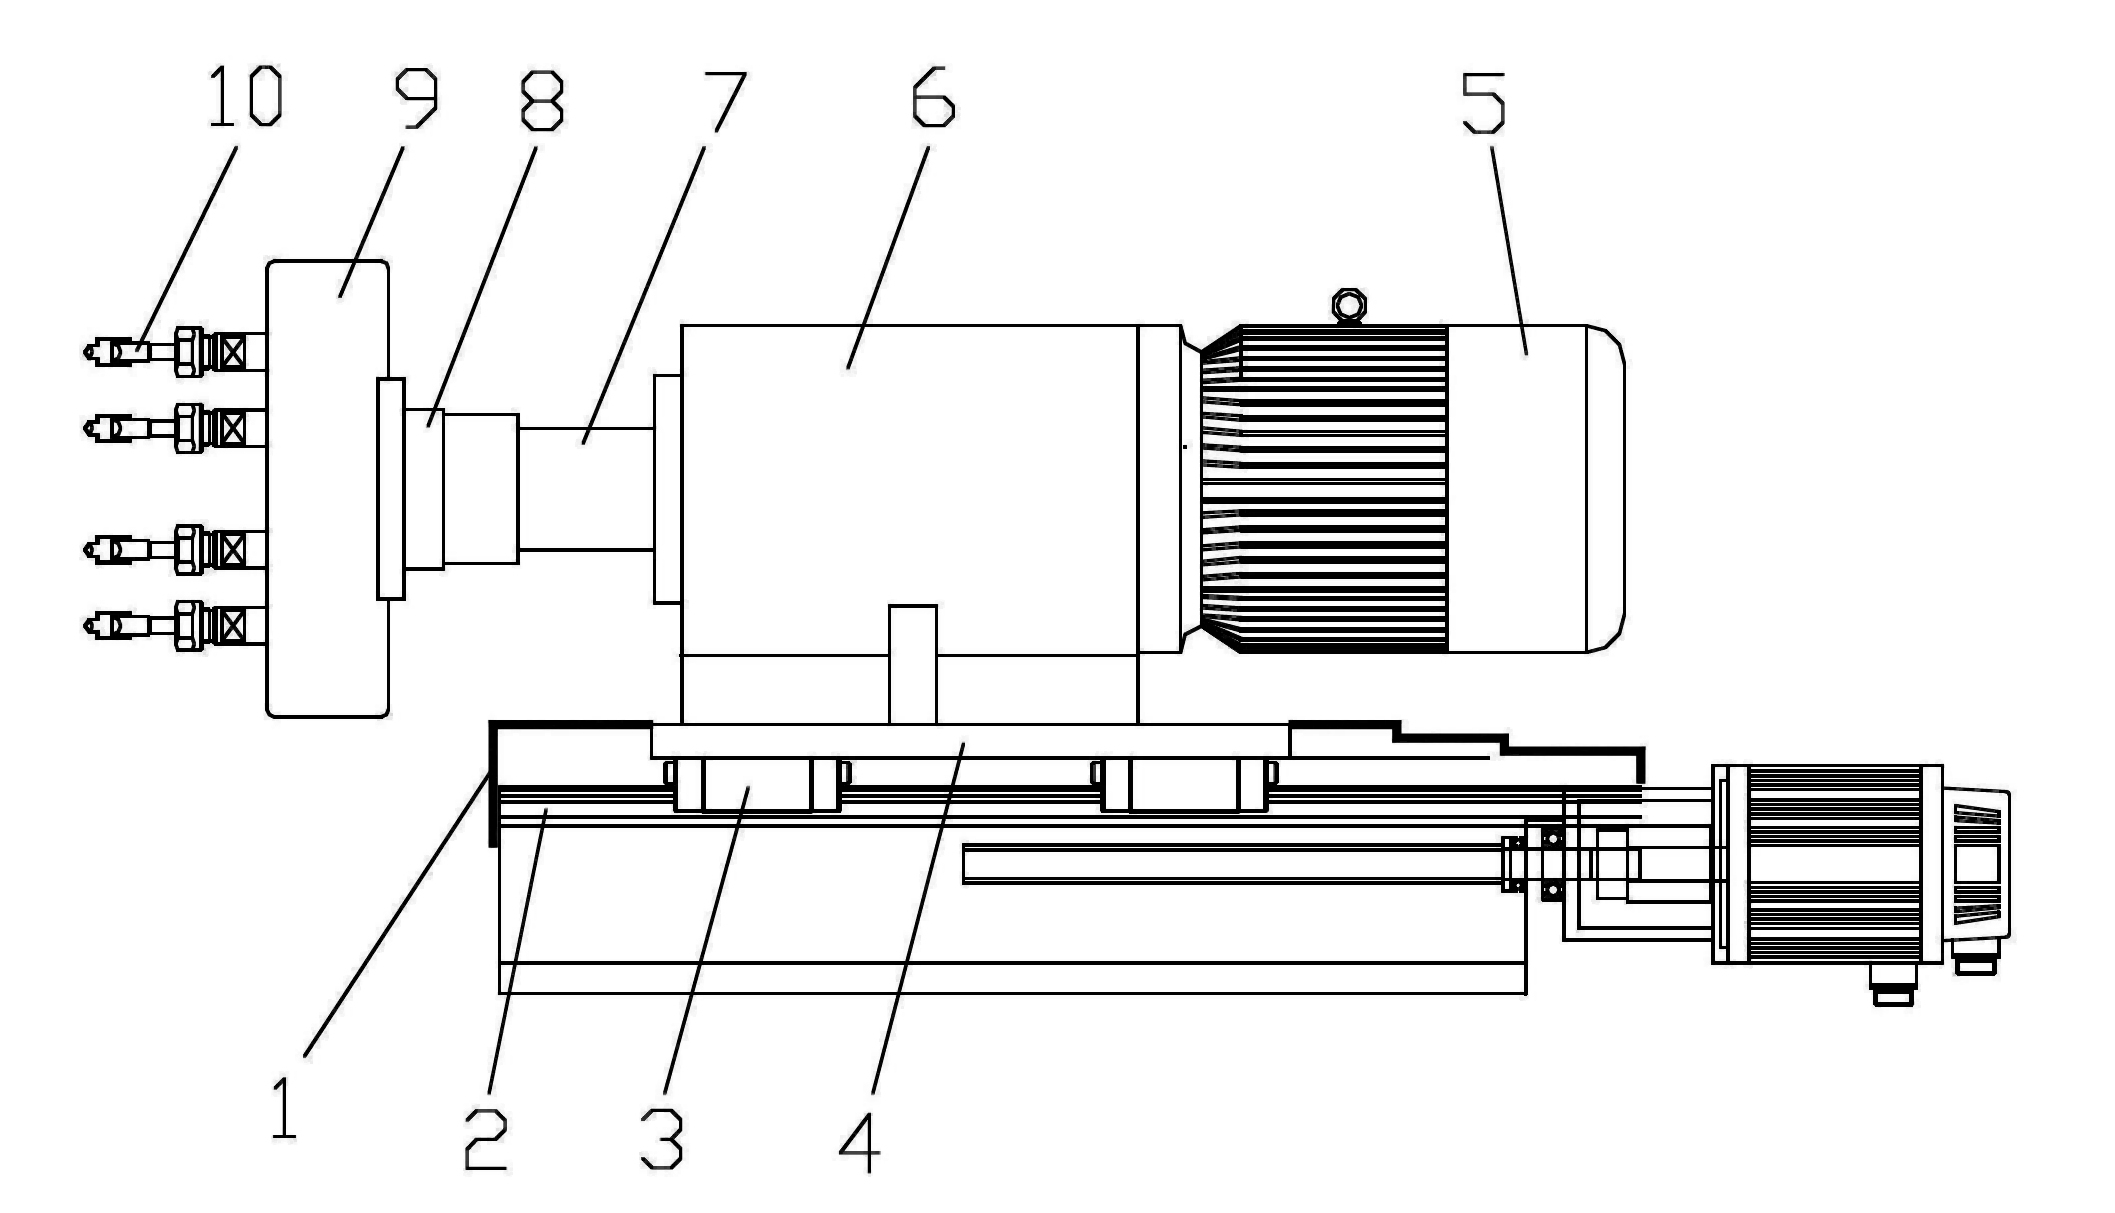 Transmission mechanism of fixed handpiece of drill press for brake pad of automobile